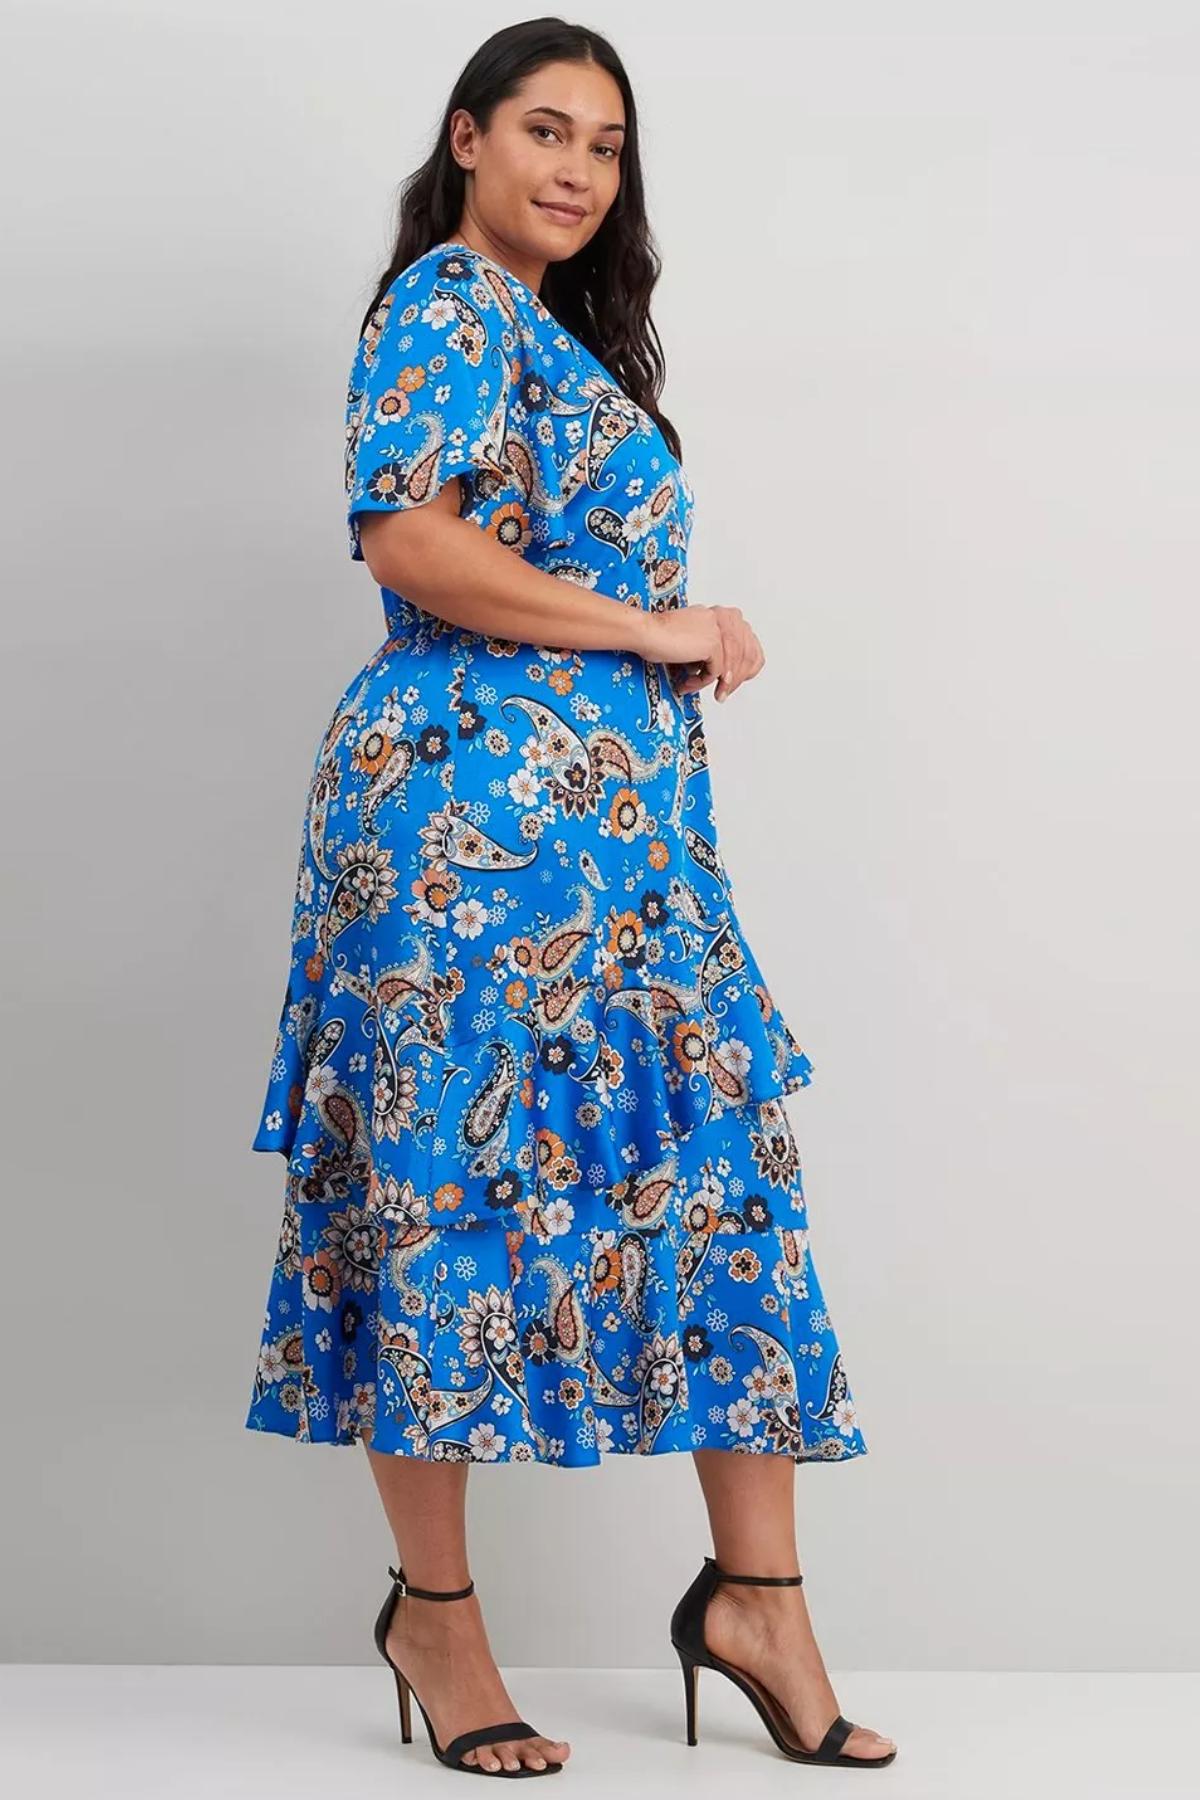 36 Stunning Plus Size Mother of the Bride Dresses - hitched.co.uk